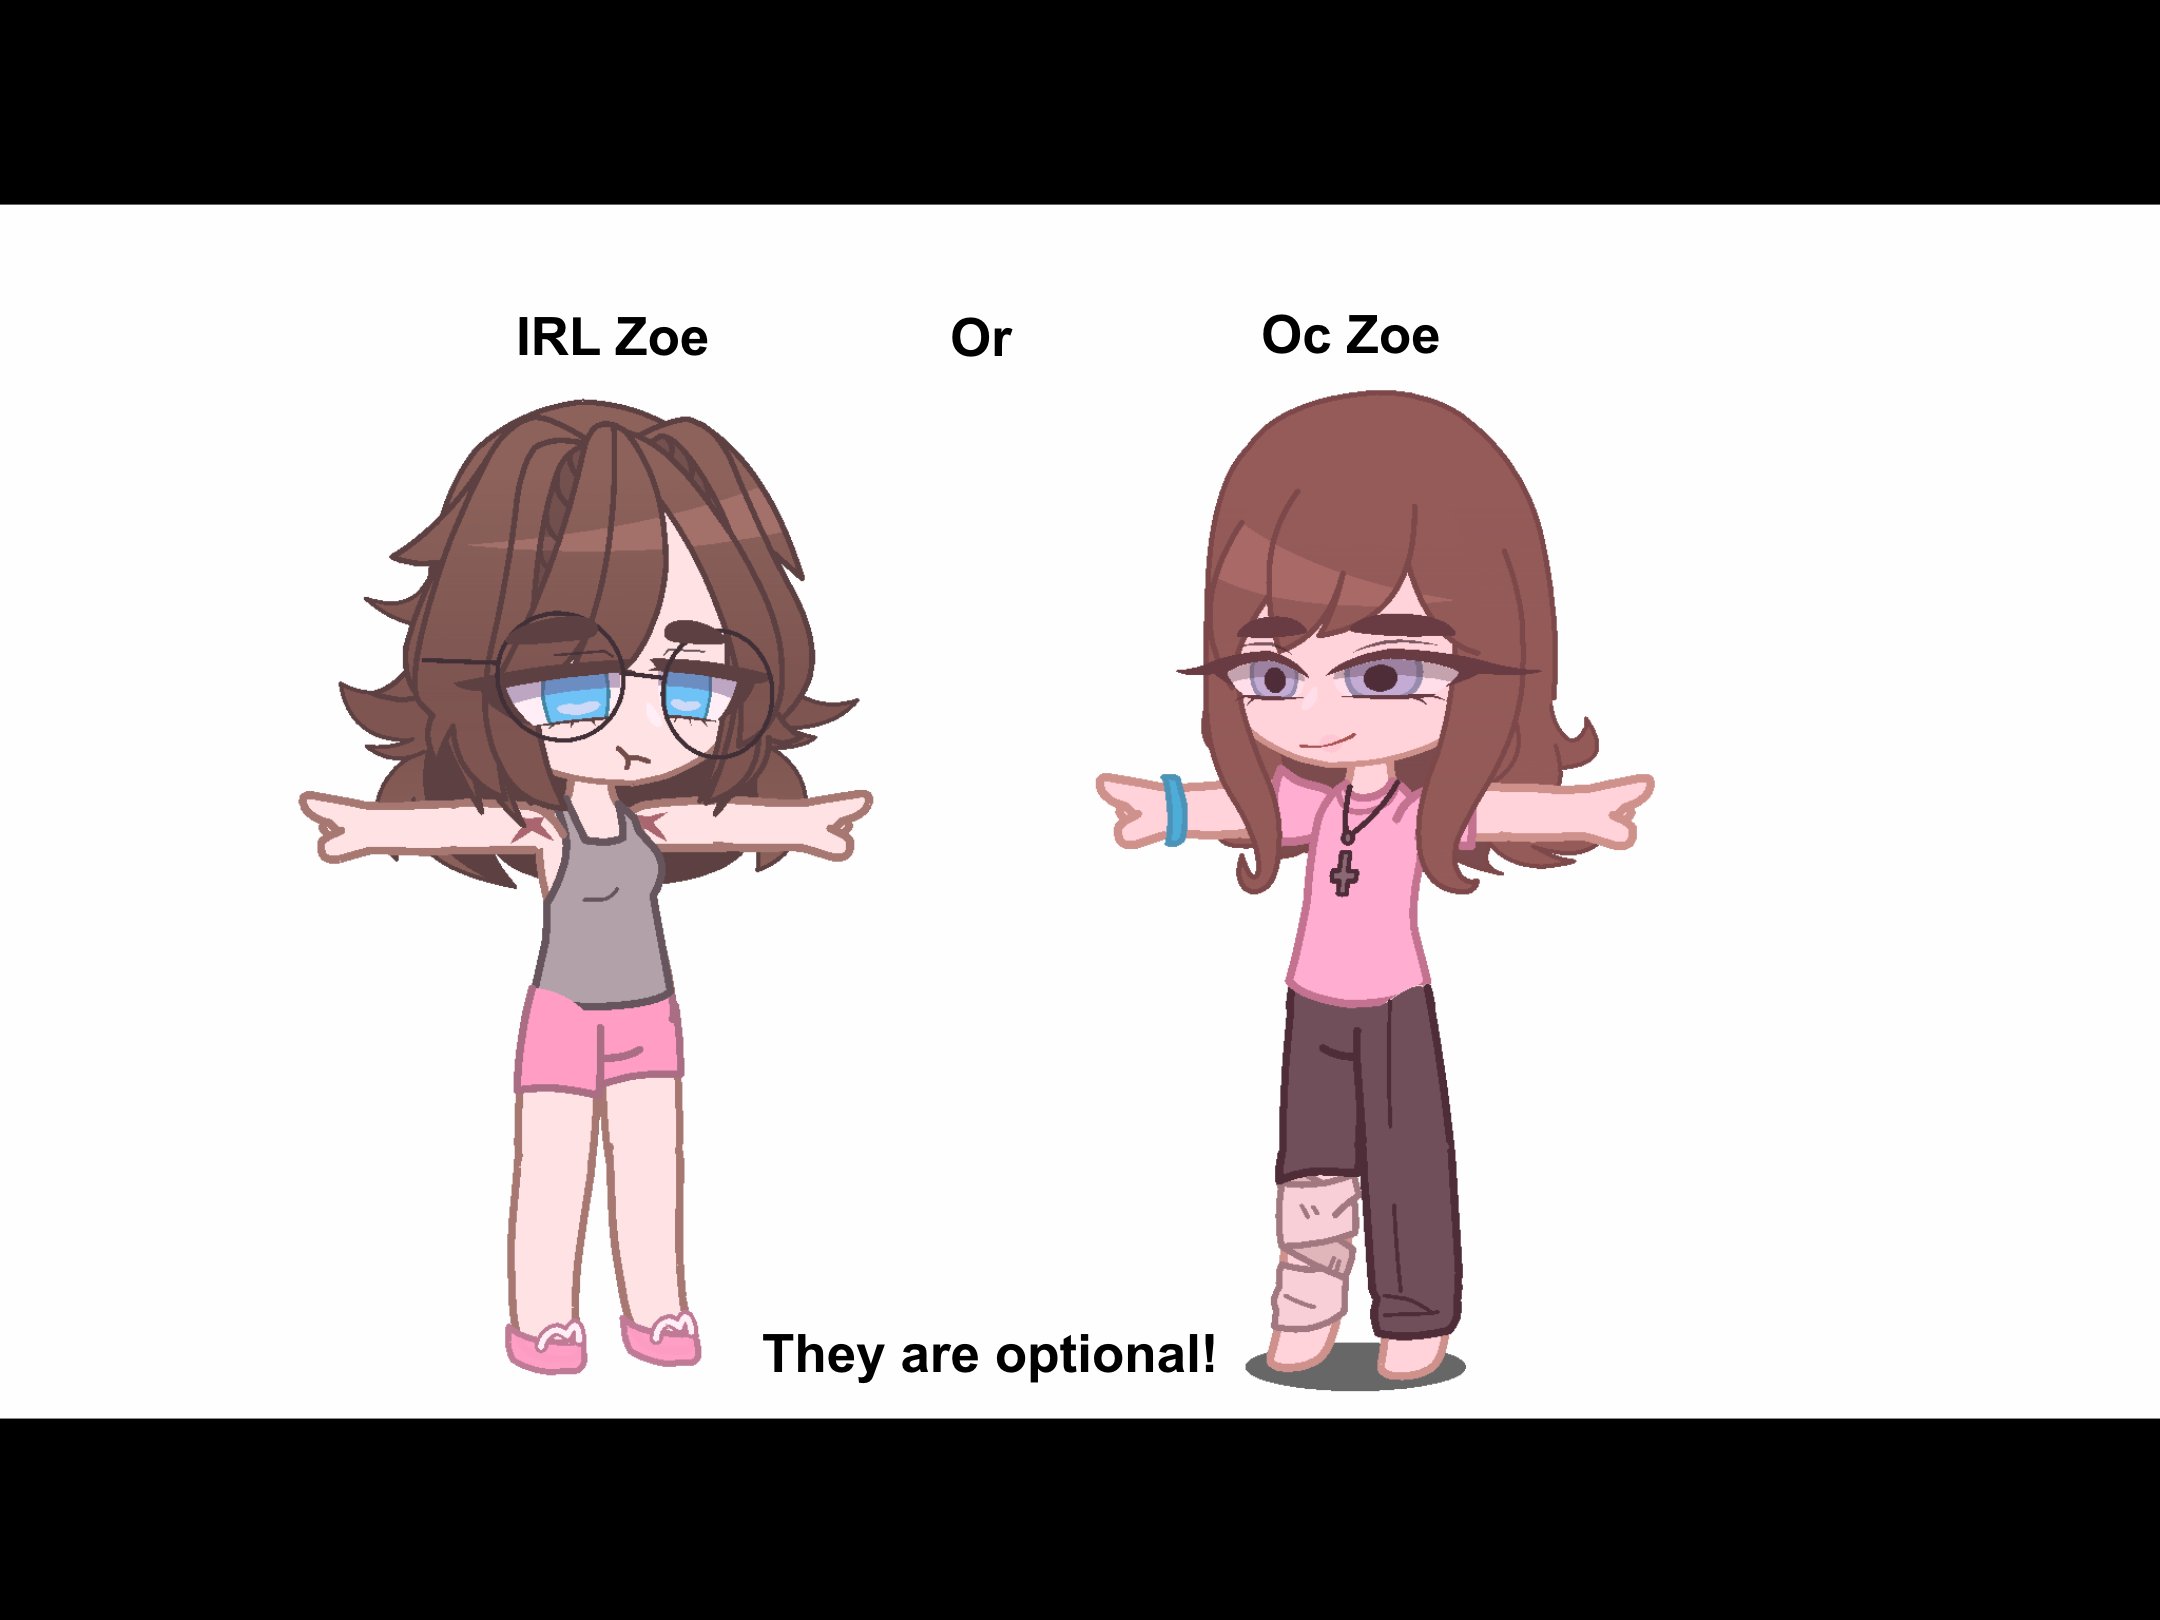 Zoe Morris on X: Who wants to use my oc? They are free to use